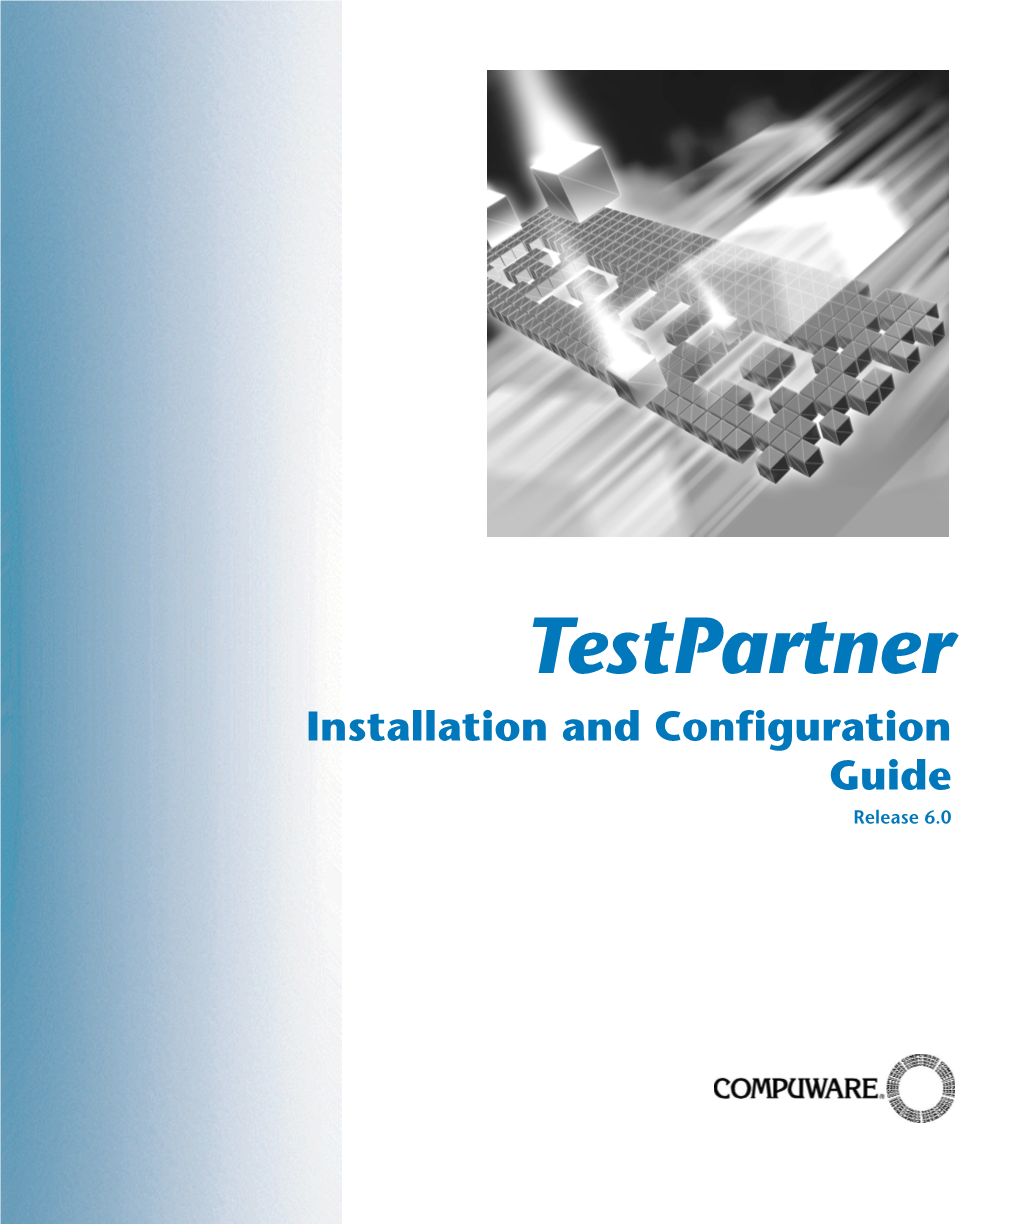 Testpartner Installation and Configuration Guide Release 6.0 Customer Support Is Available from Our Customer Support Hotline Or Via Our Frontline Support Web Site